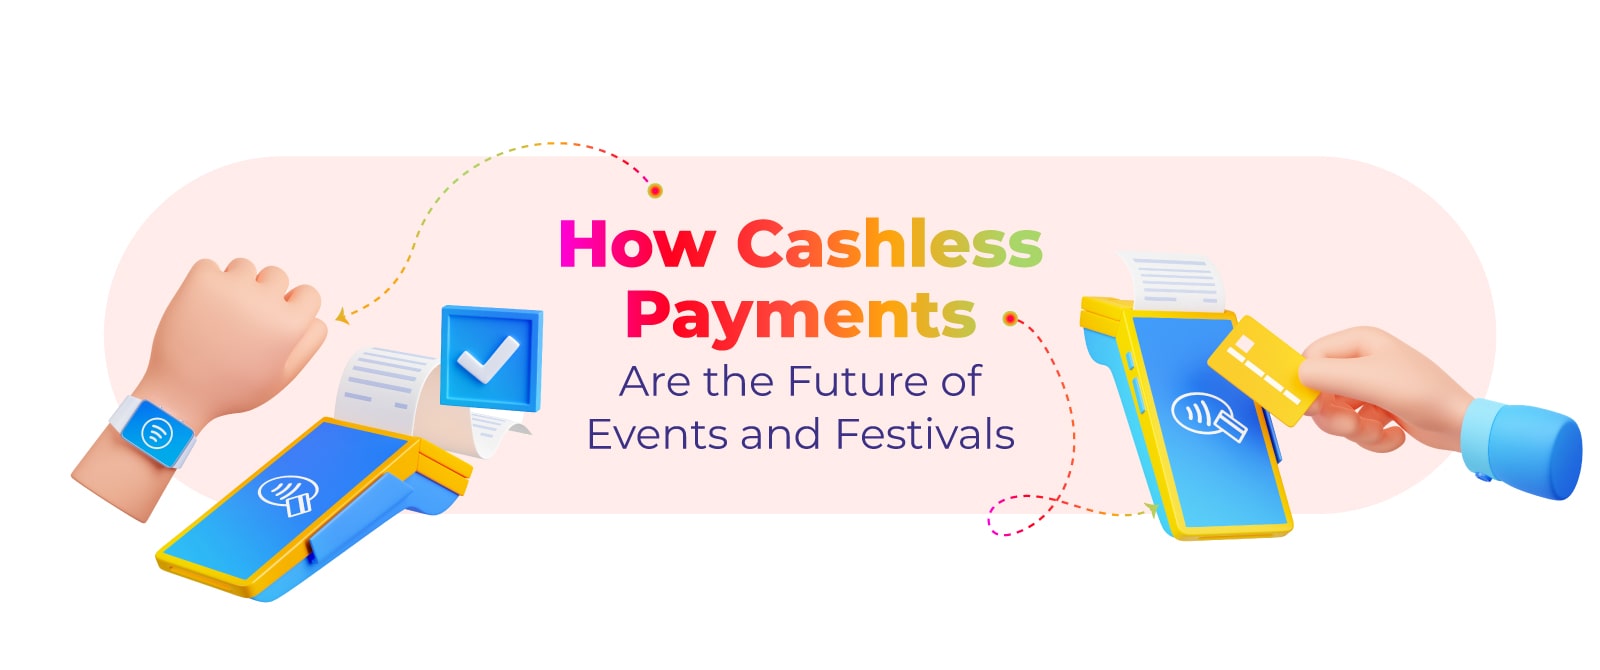 How Cashless Payments Are the Future of Events and Festivals